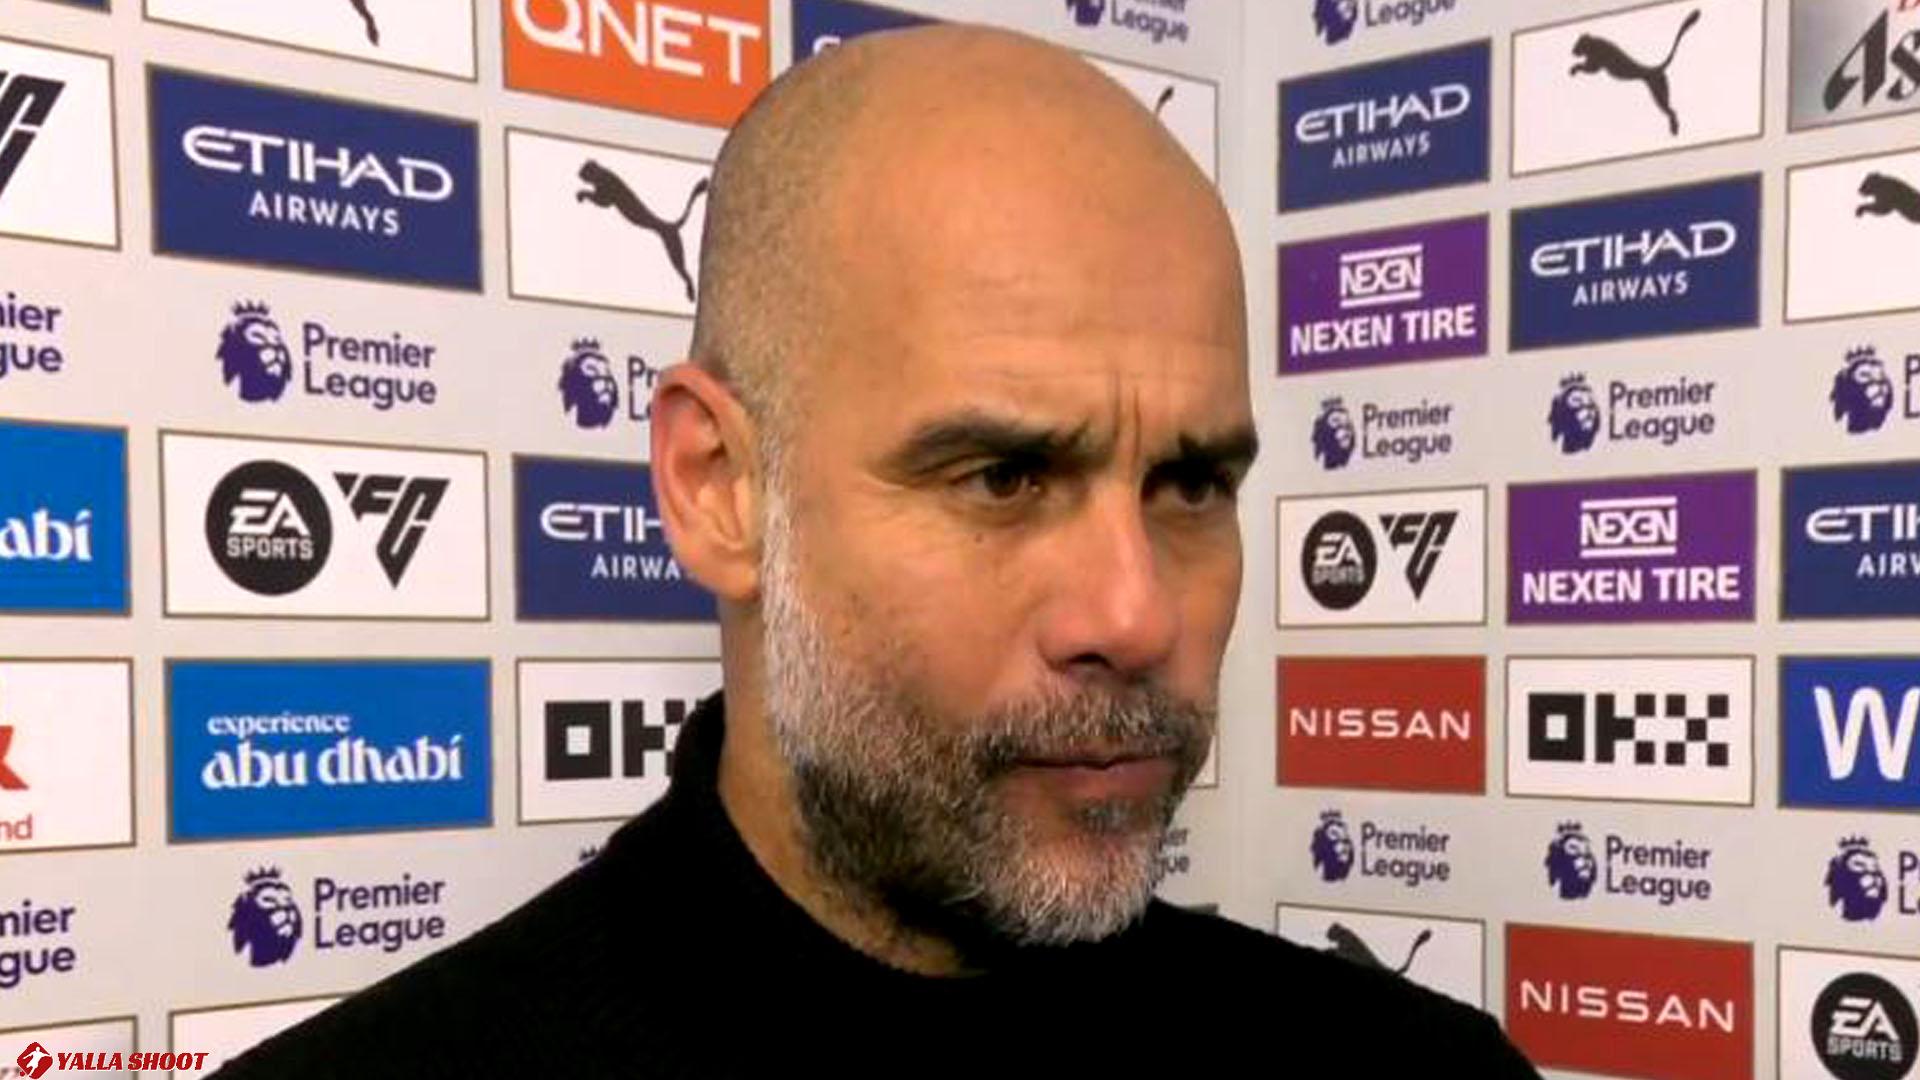 Pep Guardiola in brutal Mikel Arteta putdown as Man City boss reacts to refereeing chaos against Tottenham